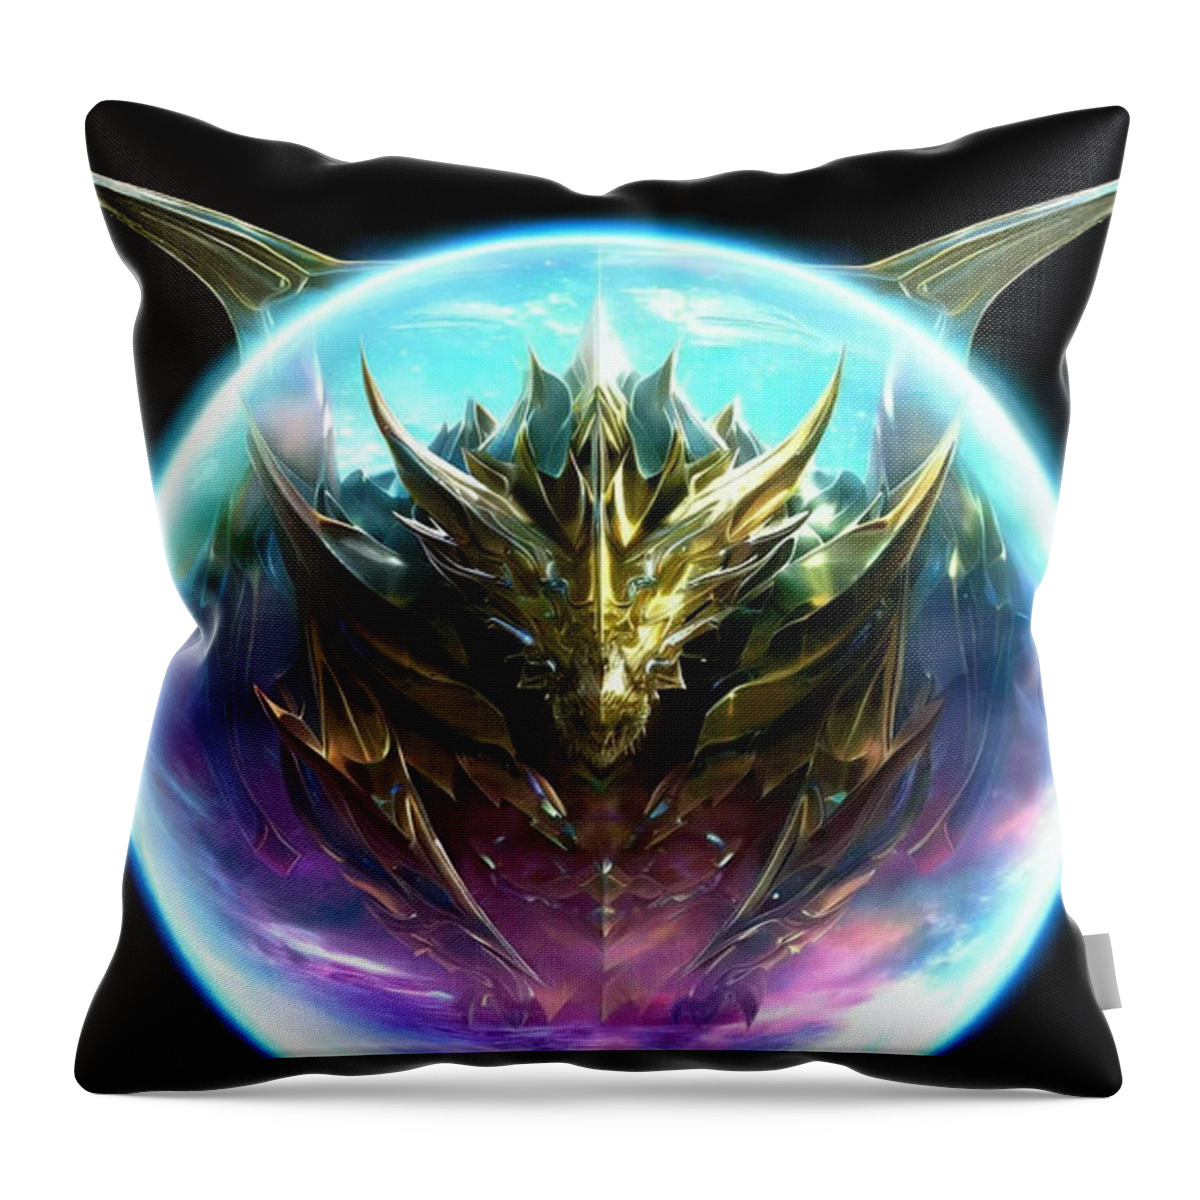 Dragon Throw Pillow featuring the digital art Pure Golden Dragon by Shawn Dall